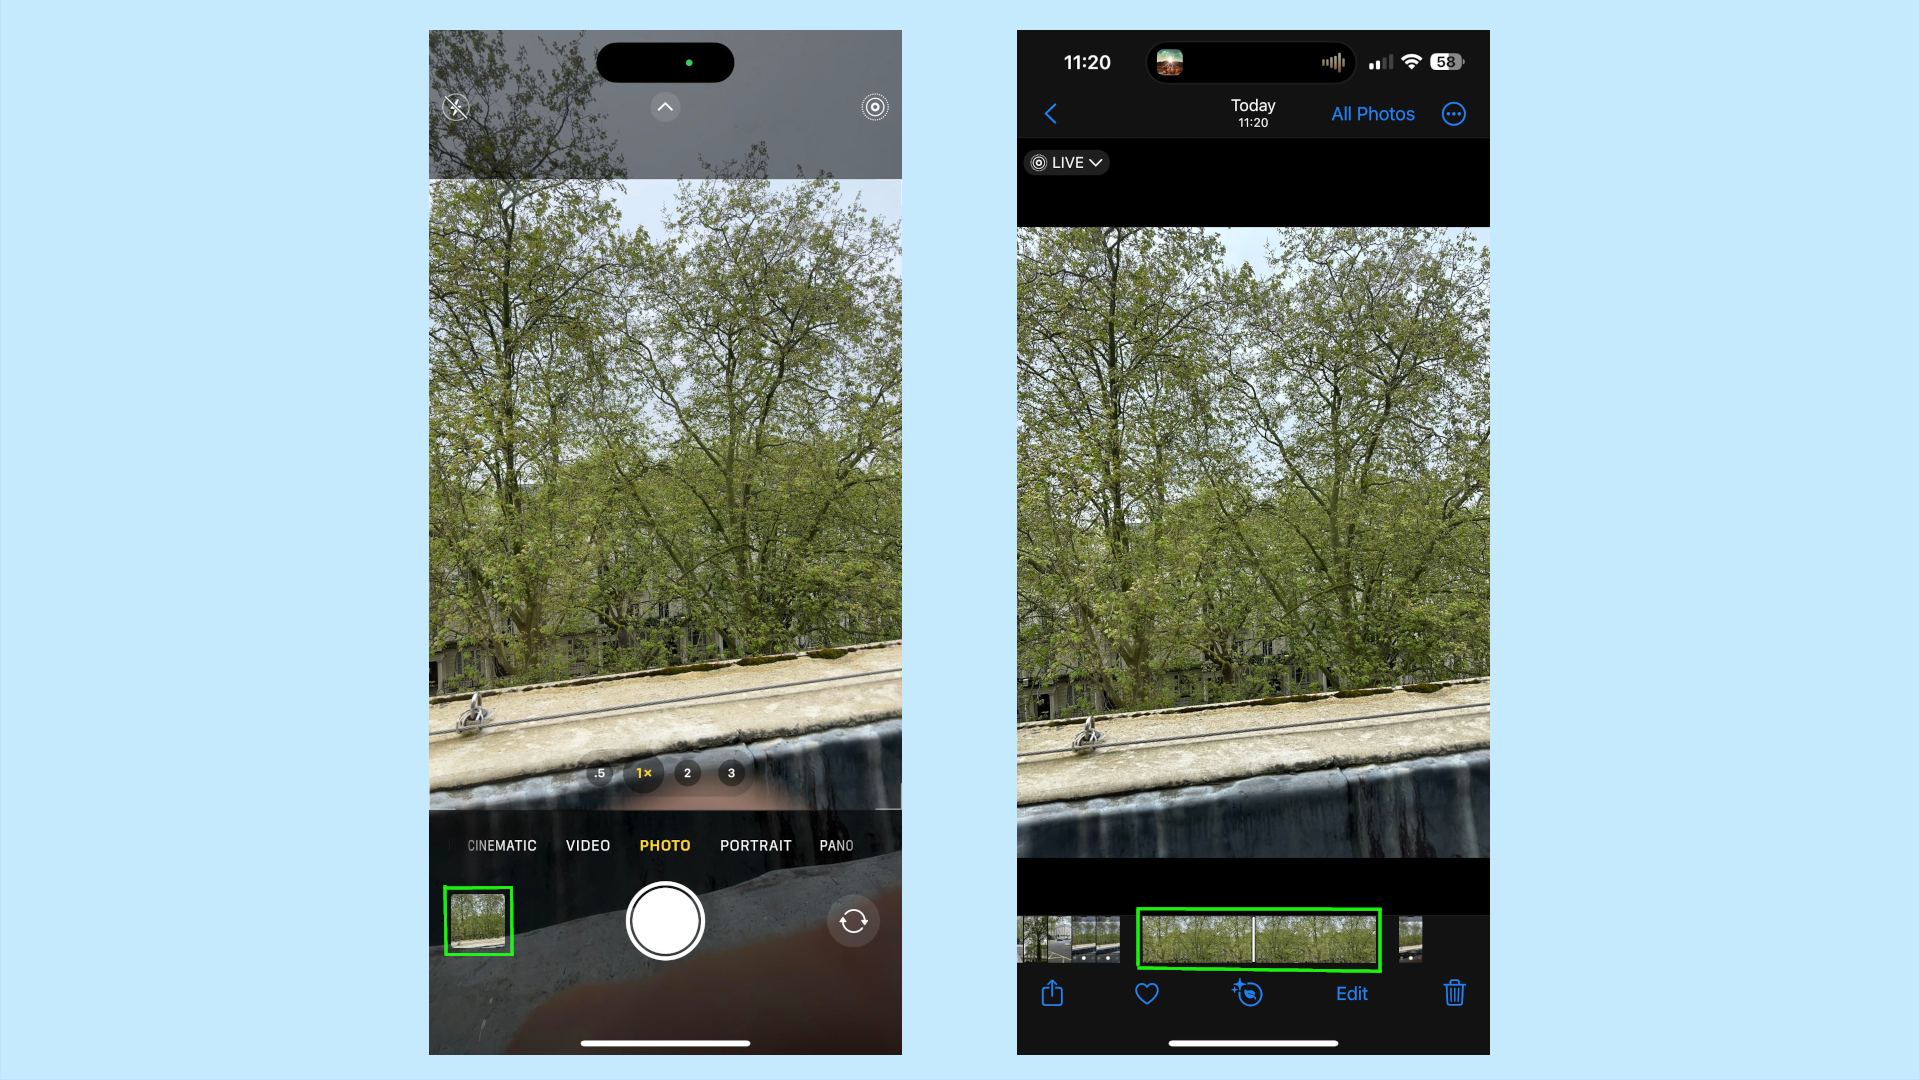 How to check the live photo and scan trough it